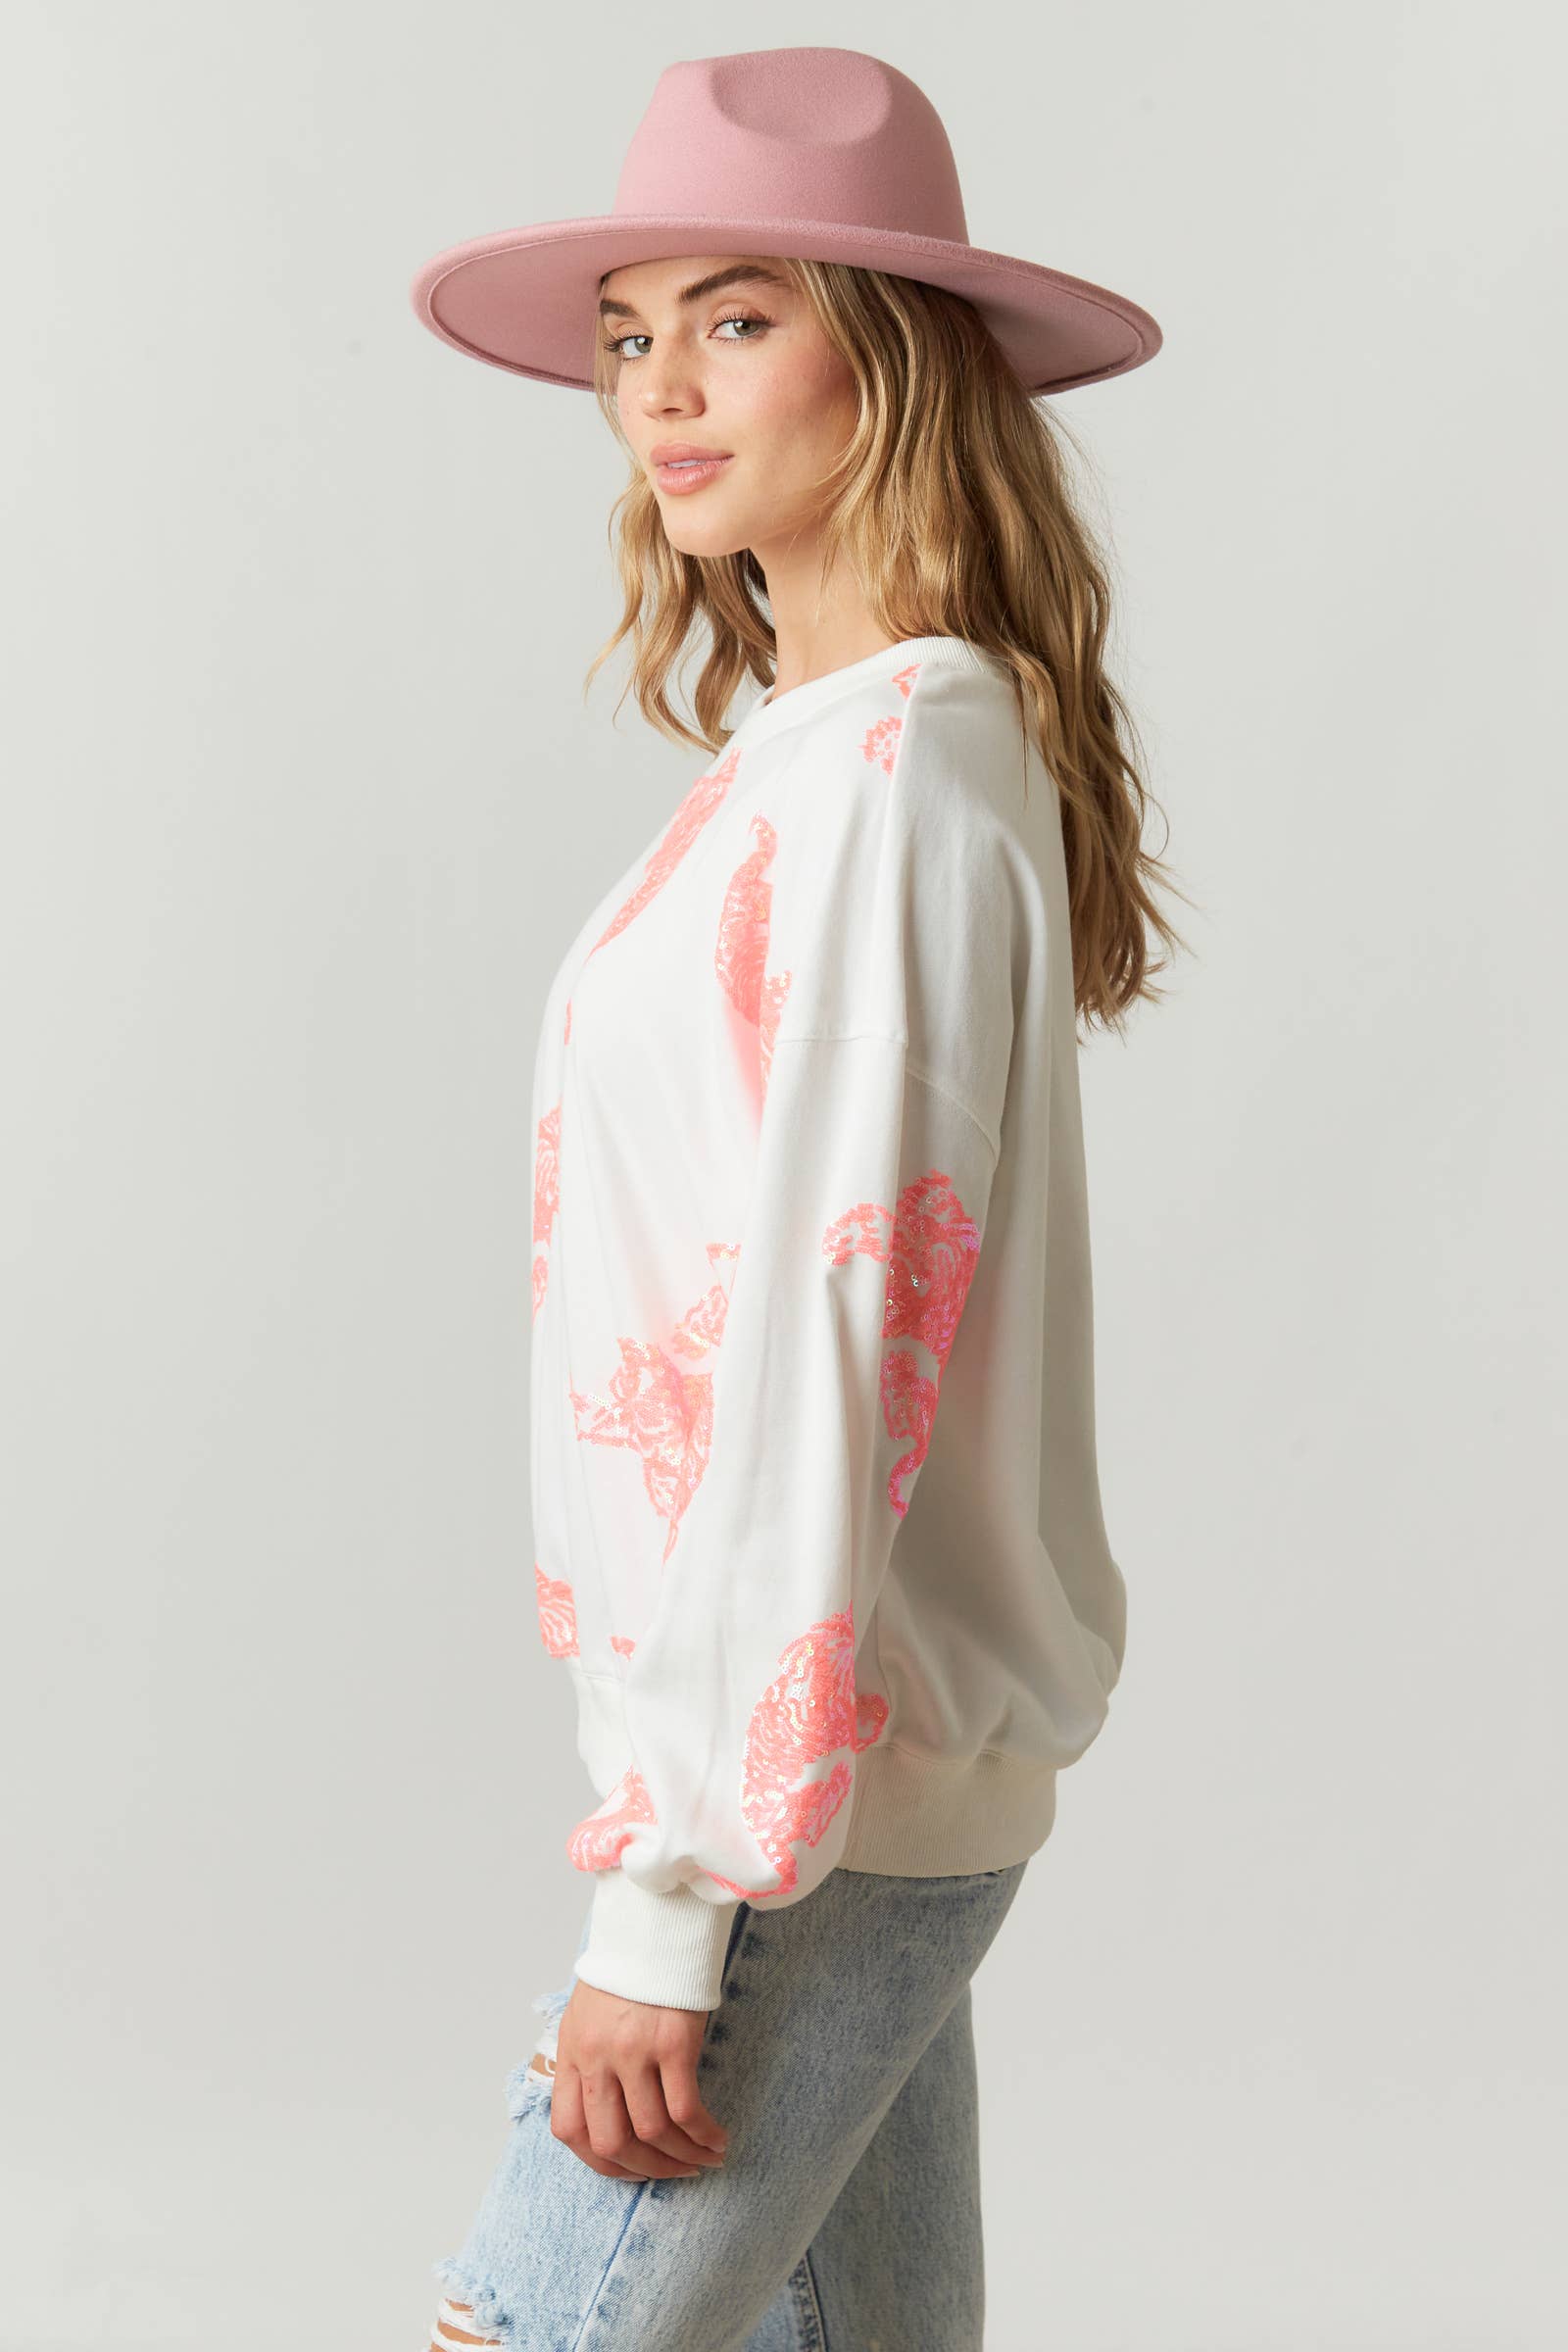 Crew Neck Pull Over with Sequin Tigers - IFKT54483-01: S / WHITE/PINK - Bexa Boutique